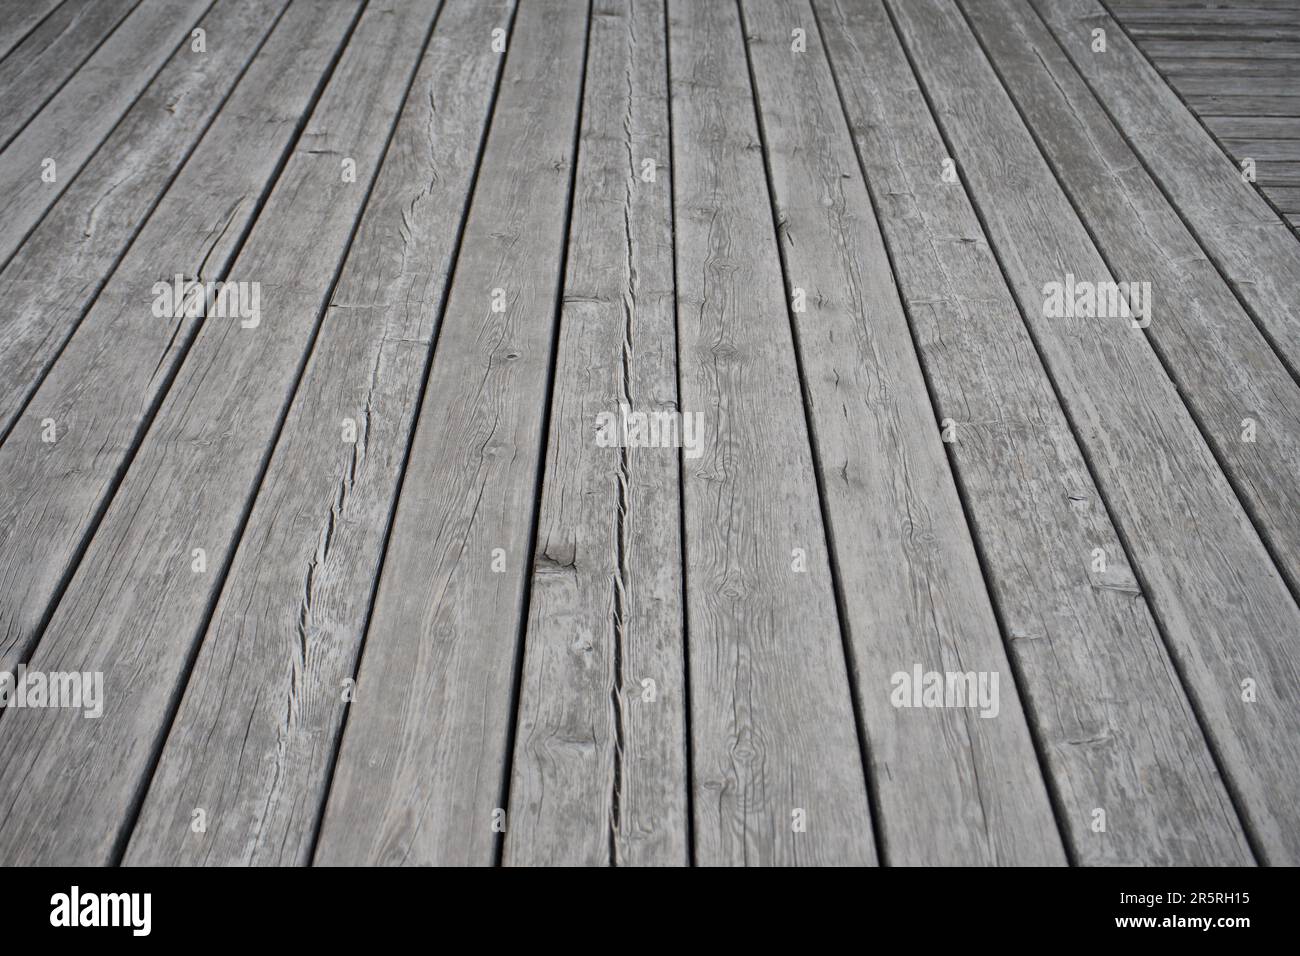 A flooring surface featuring a combination of grey wood boards and a non-wood material, creating an interesting visual contrast Stock Photo